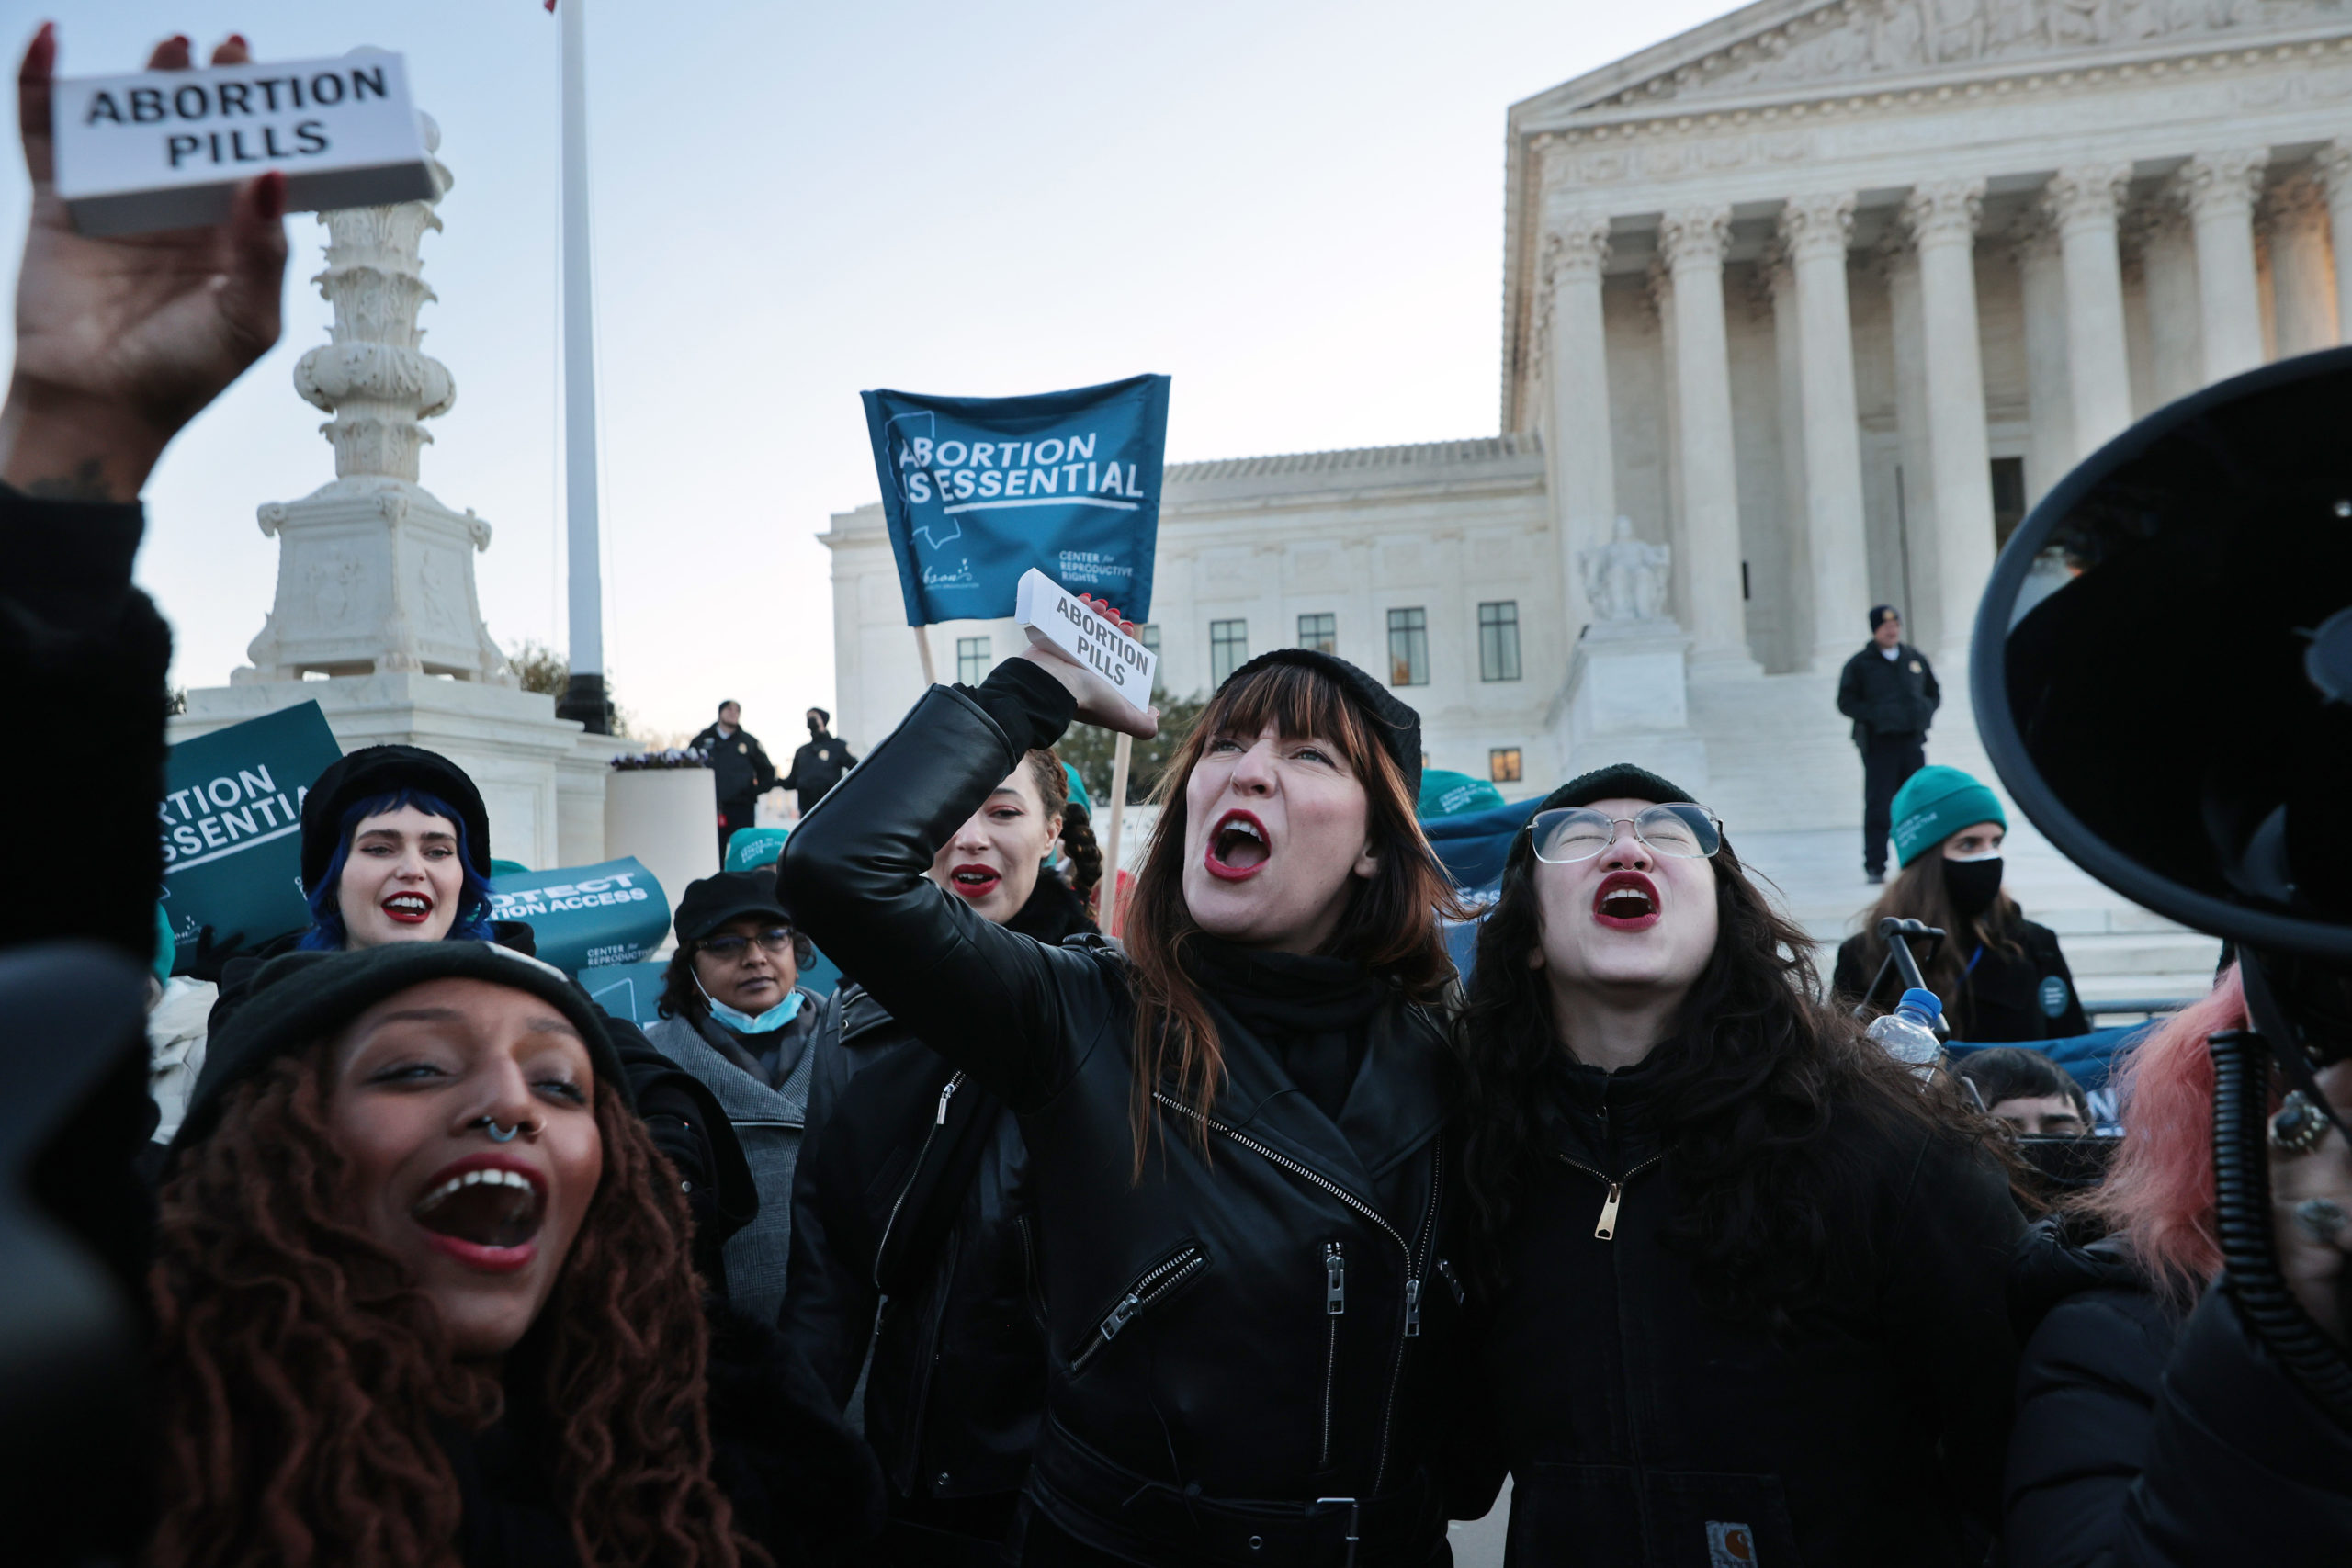 Alana Edmondson, Lila Bonow, Amelia Bonow, Aiyana Knauer celebrate after takiong abortion pills while demonstrating in front of the U.S. Supreme Court as the justices hear hear arguments in Dobbs v. Jackson Women's Health, a case about a Mississippi law that bans most abortions after 15 weeks, on December 01, 2021 in Washington, DC.